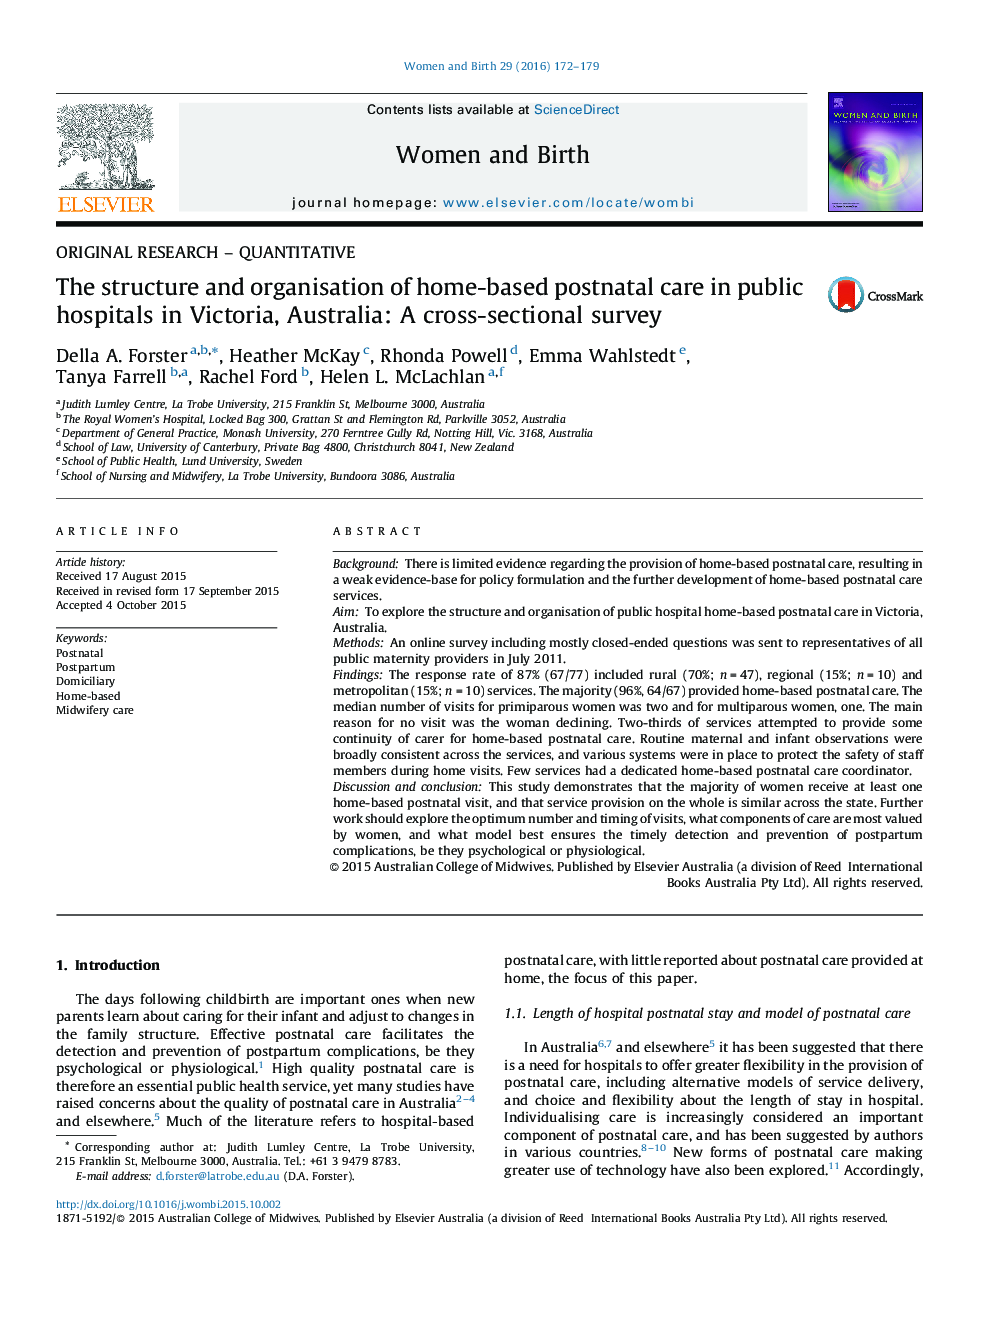 The structure and organisation of home-based postnatal care in public hospitals in Victoria, Australia: A cross-sectional survey